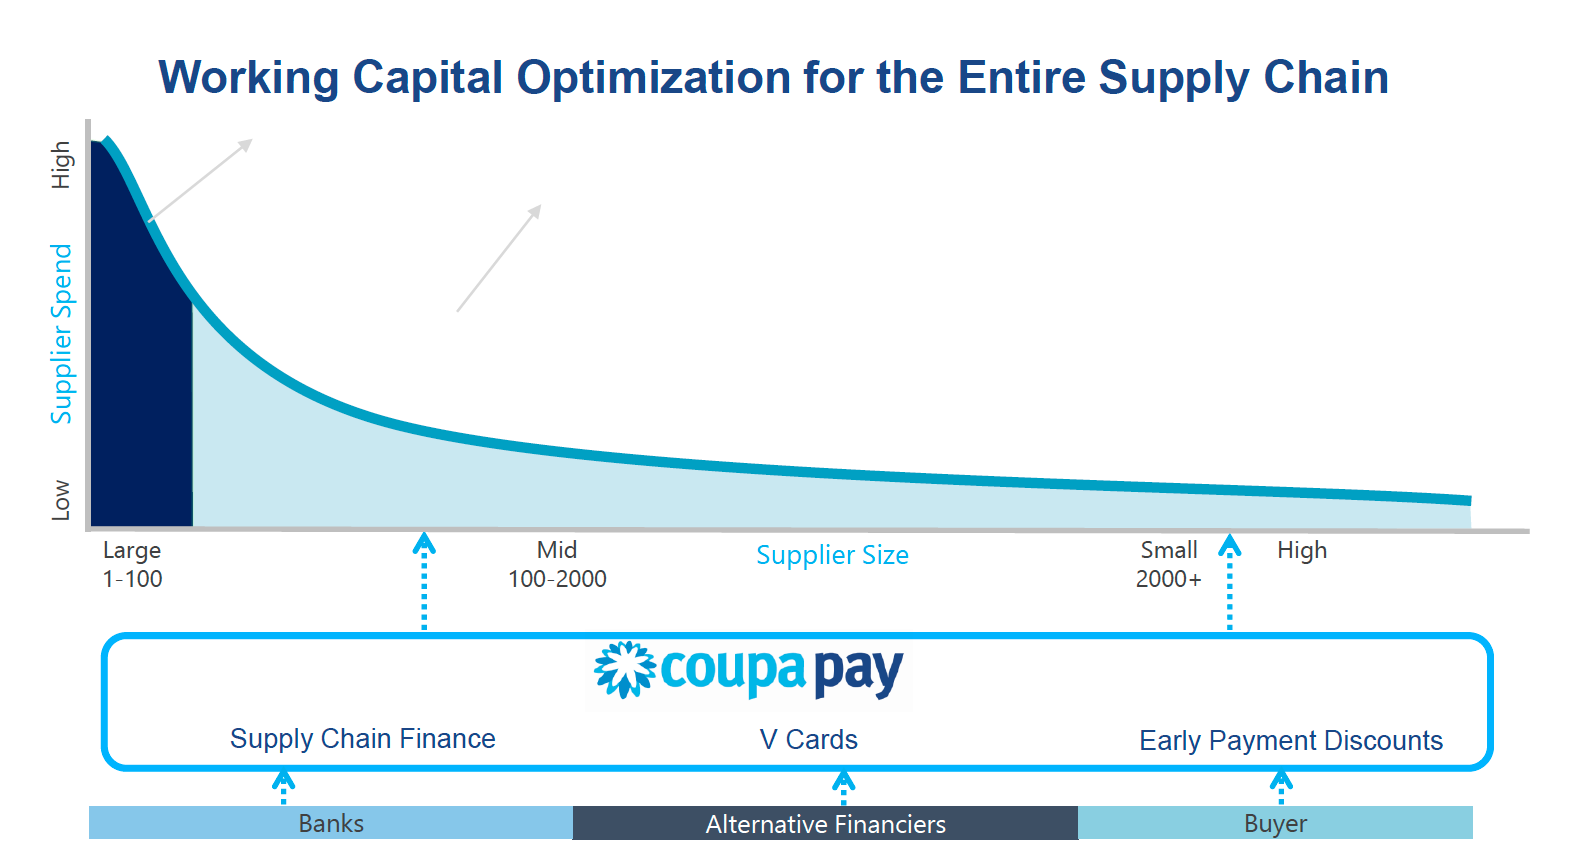 Working Capital Optimization for the Entire Supply Chain